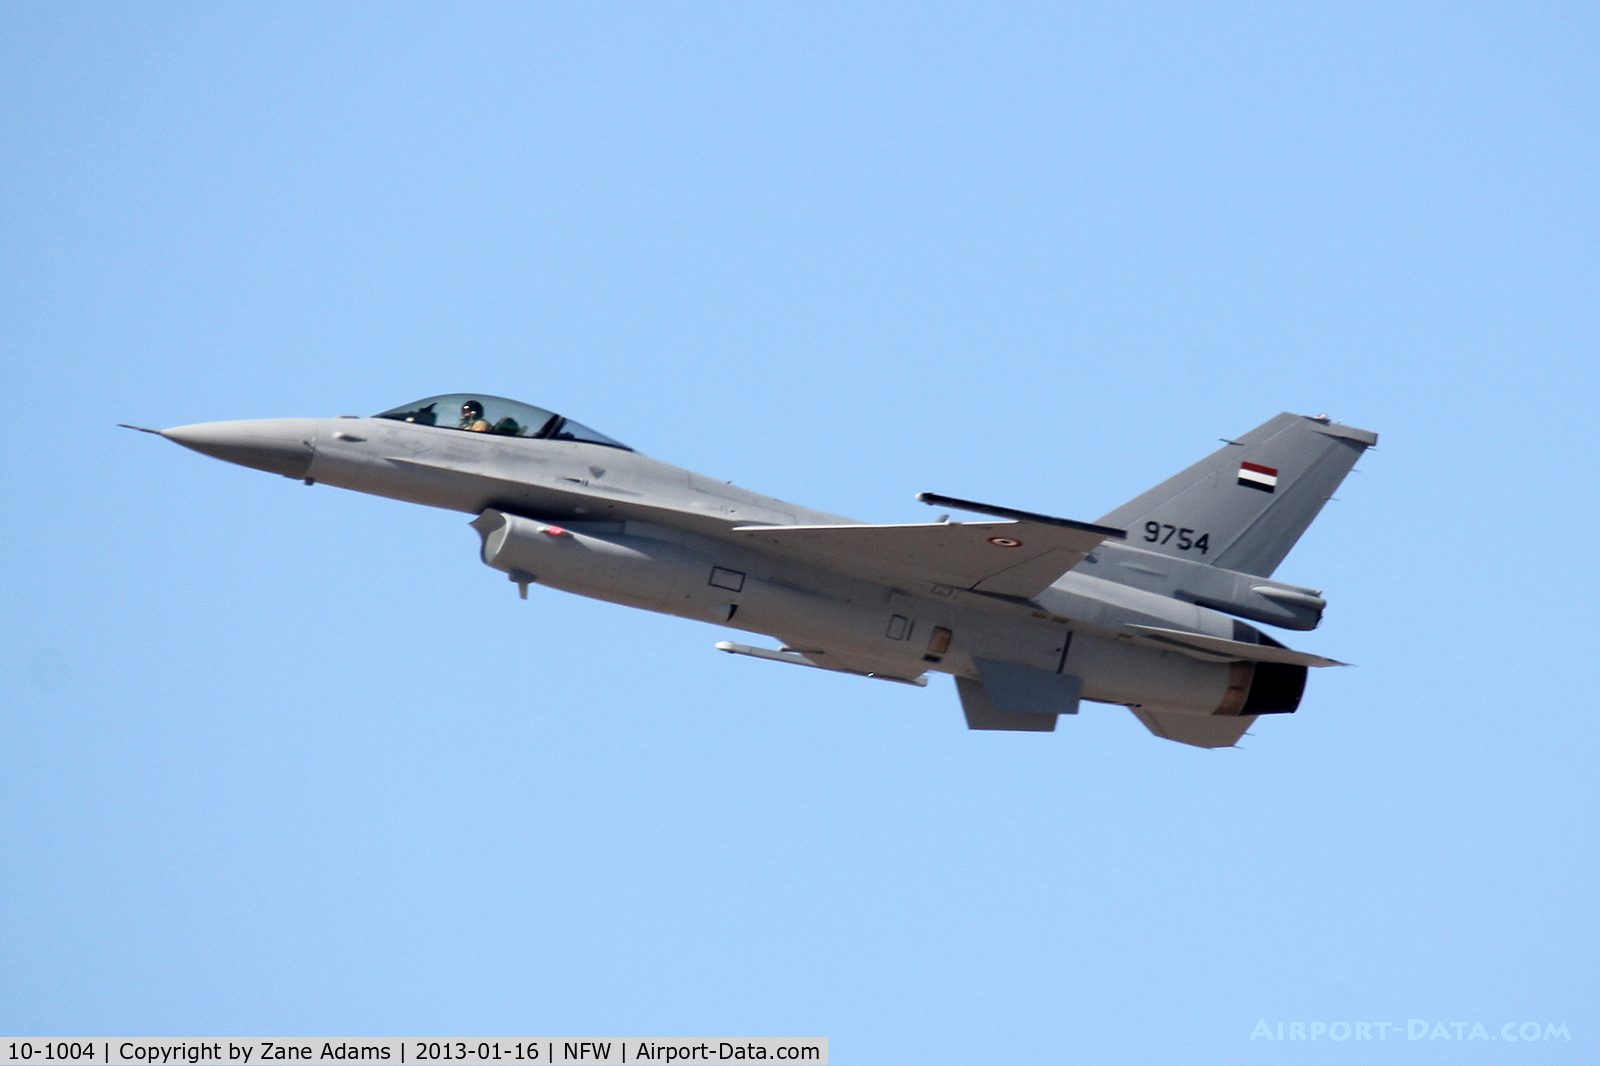 10-1004, 2010 Lockheed Martin F-16C Fighting Falcon C/N JJ-04, Egyptian Air Force F-16C on a pre-delivery test flight at NASNRB Fort Worth